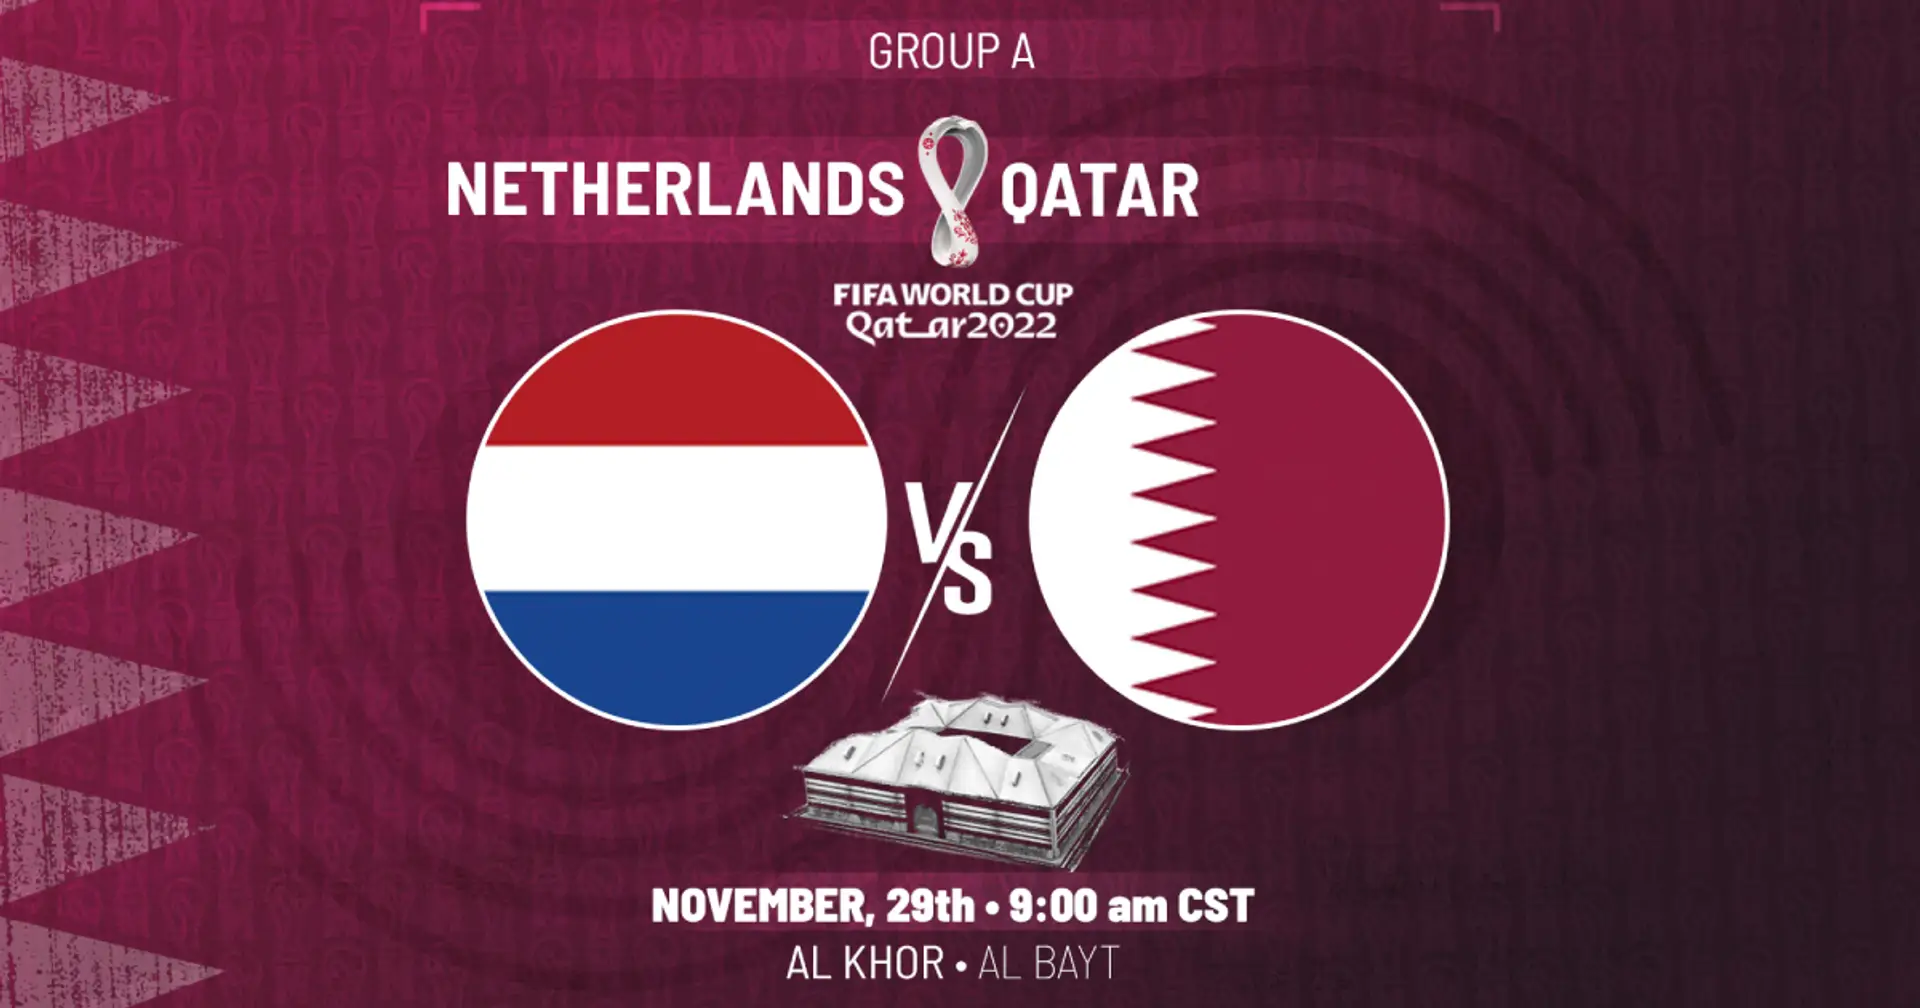 Netherlands vs Qatar: Official team lineups for the World Cup clash revealed